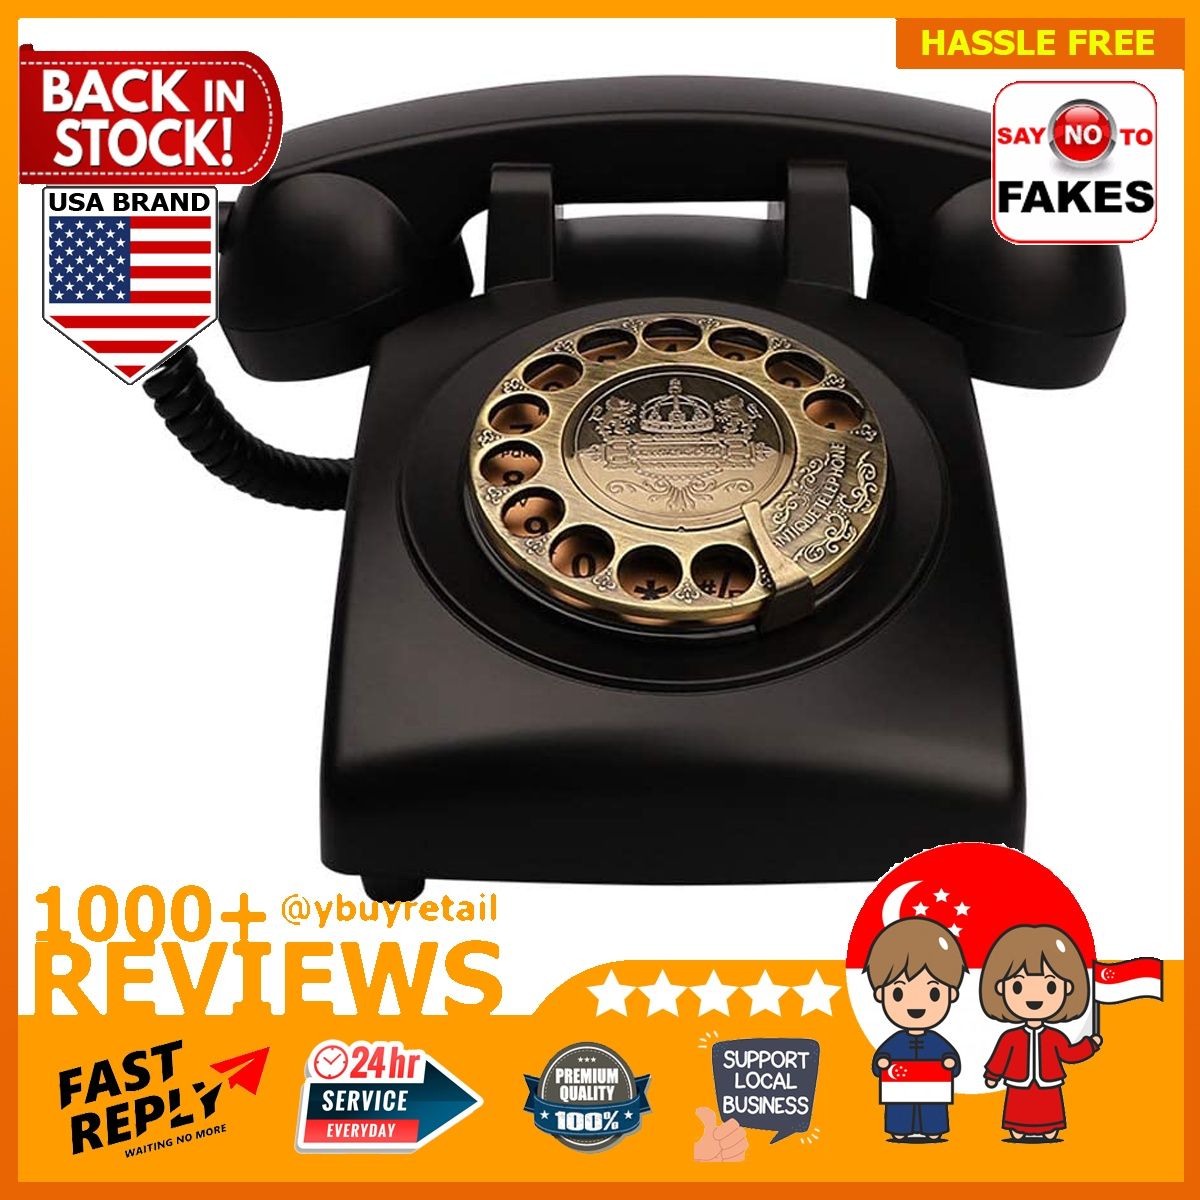 TelPal Retro Vintage Antique Telephone Old Fashioned with Push Button dial  for Home Decor